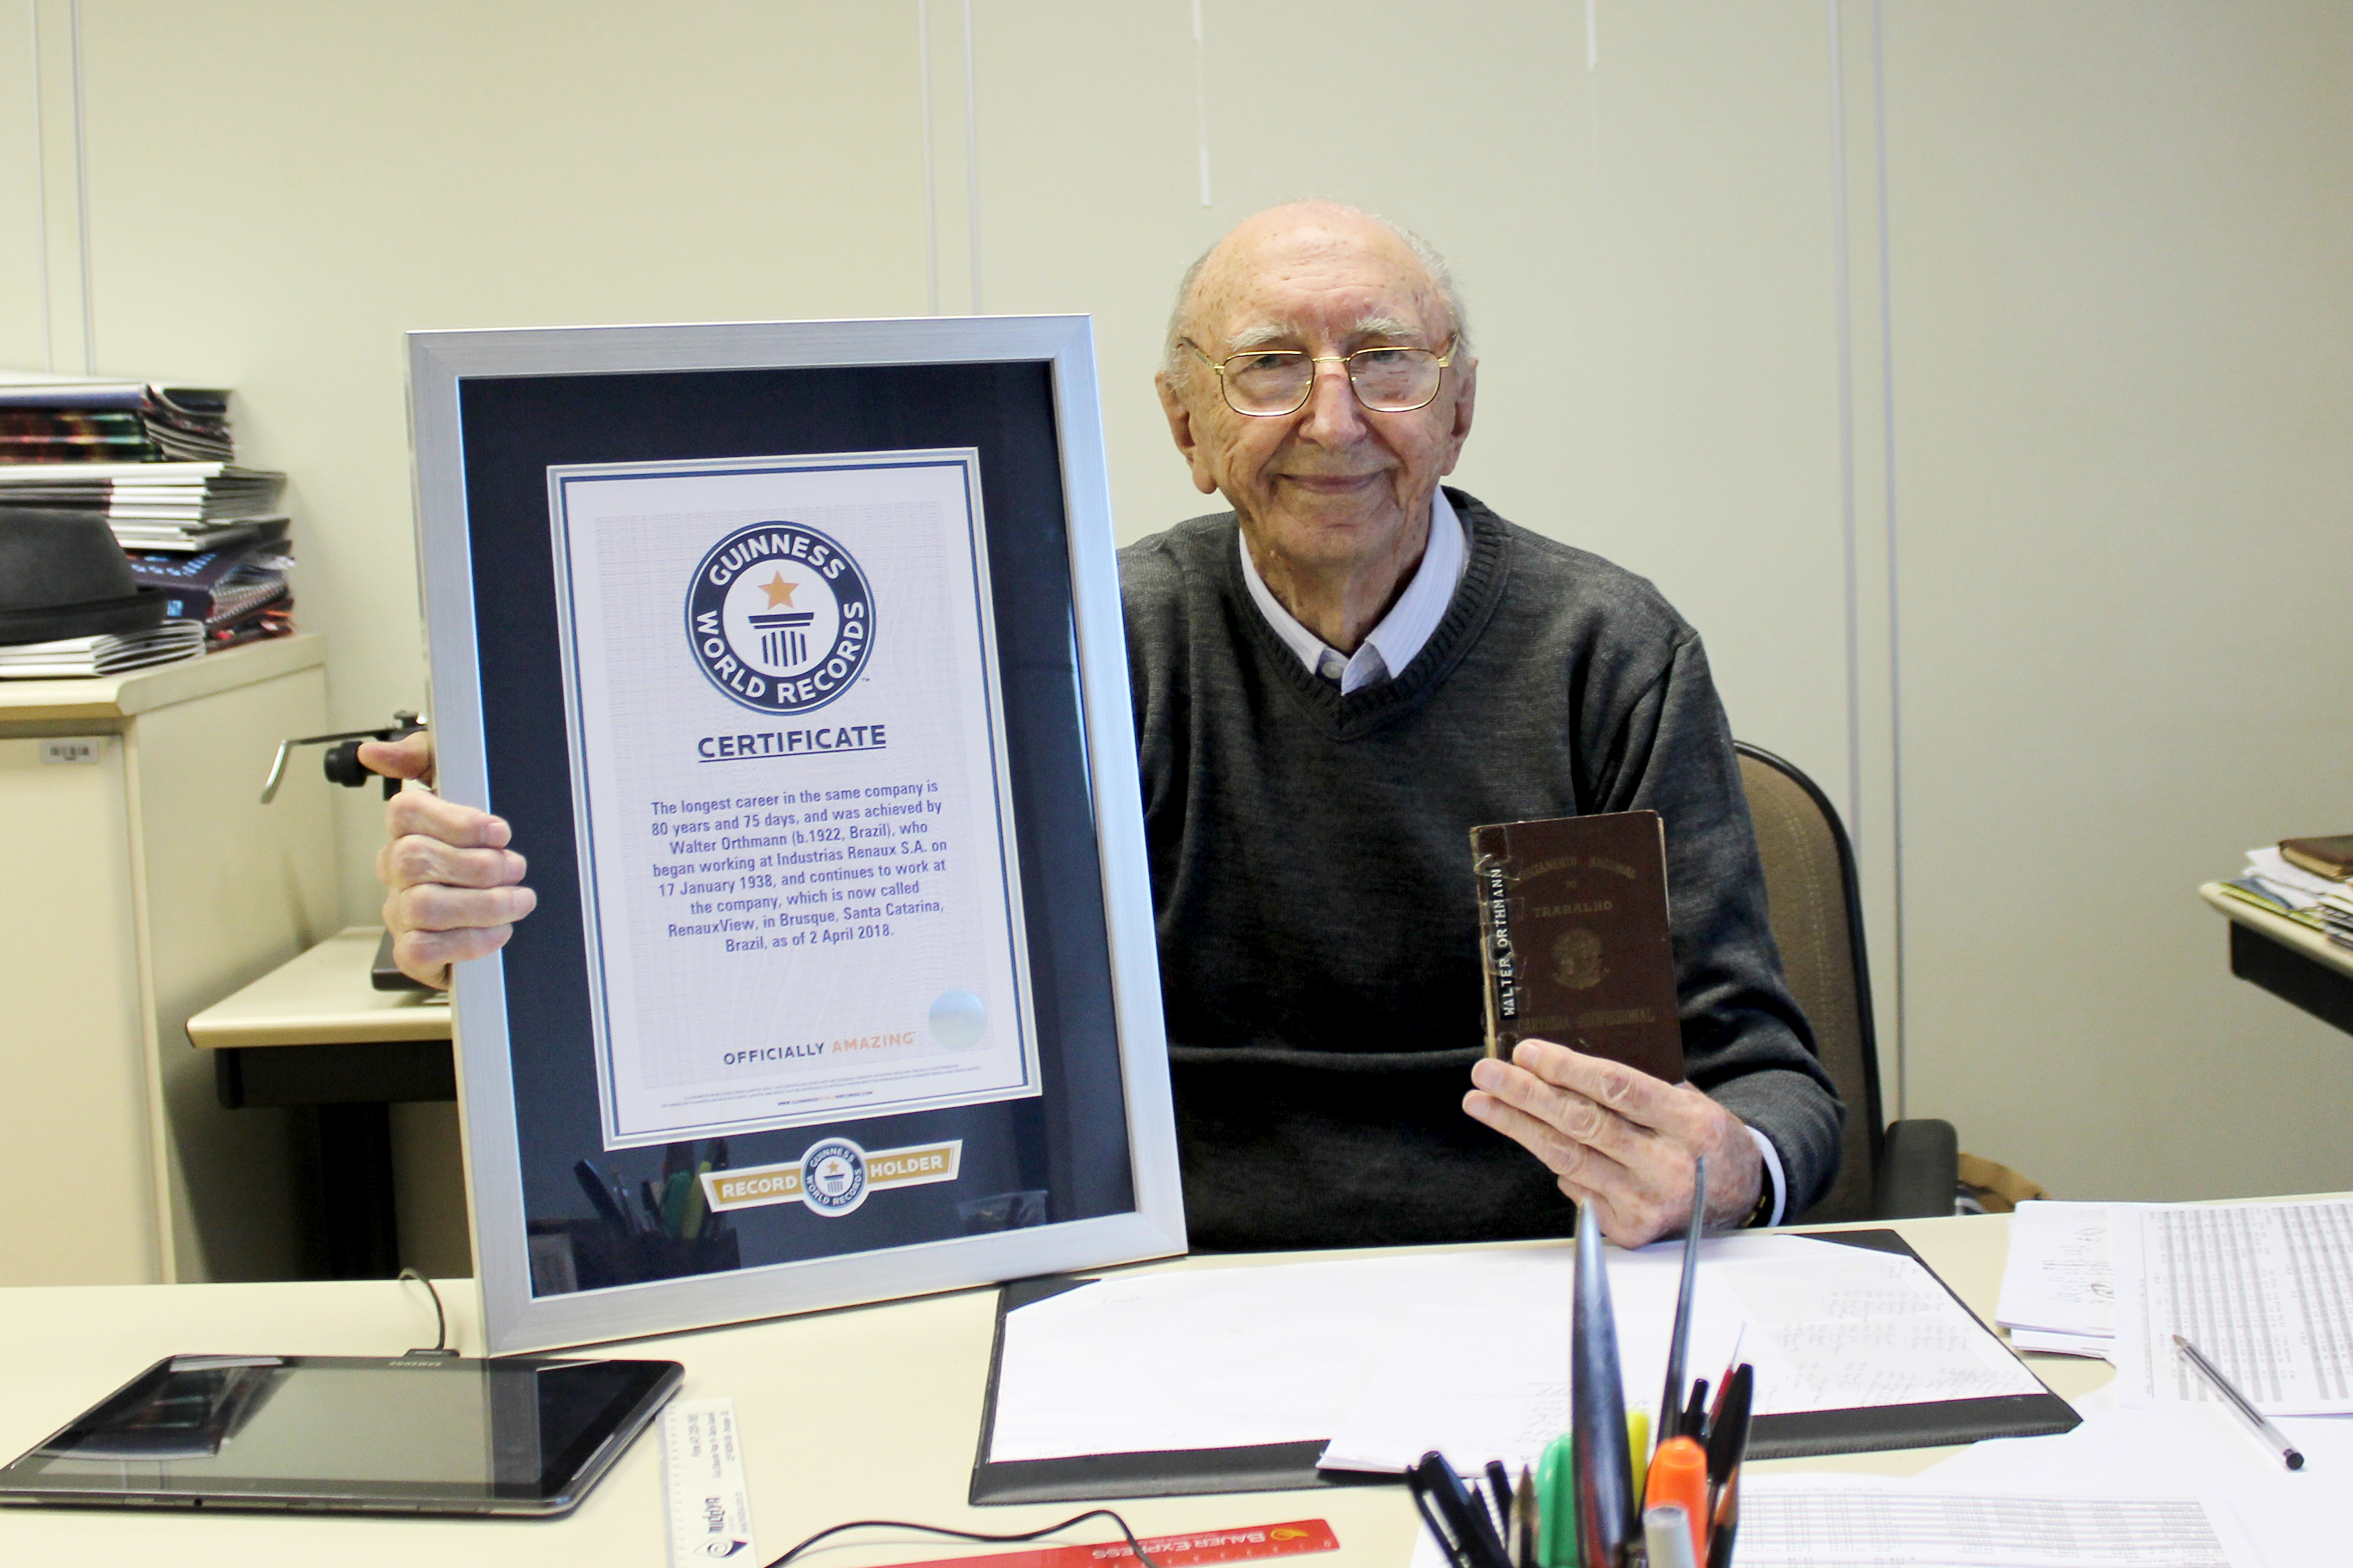 100-year-old Brazilian breaks record after 84 years at same company |  Guinness World Records